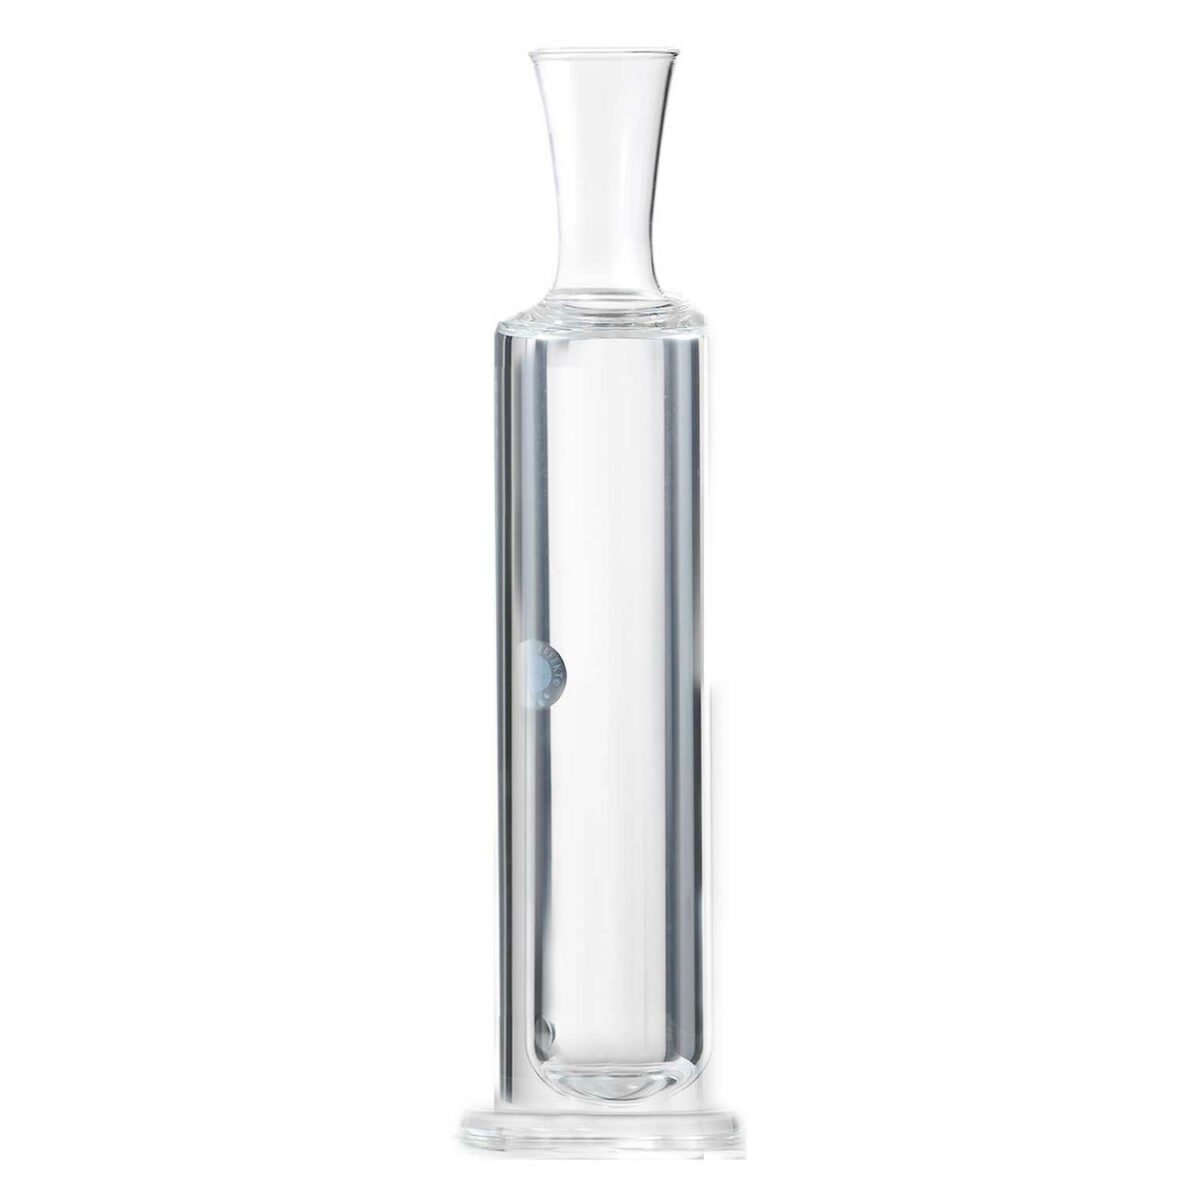 RAPID COOL cooling decanter